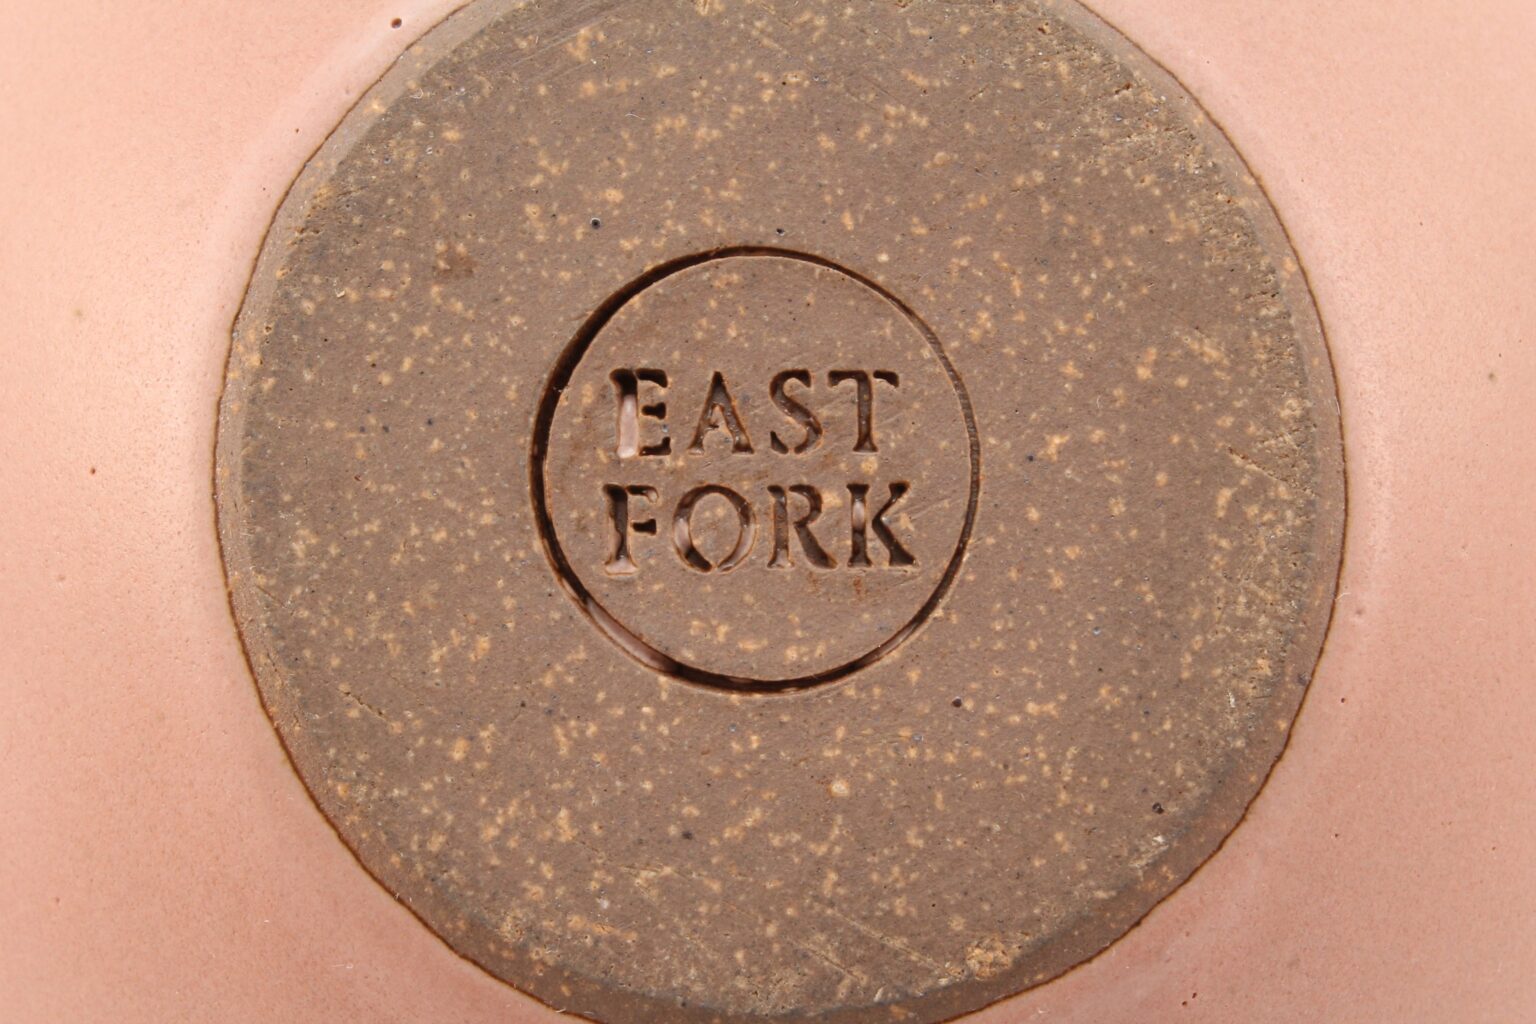 Made by East Fork Pottery